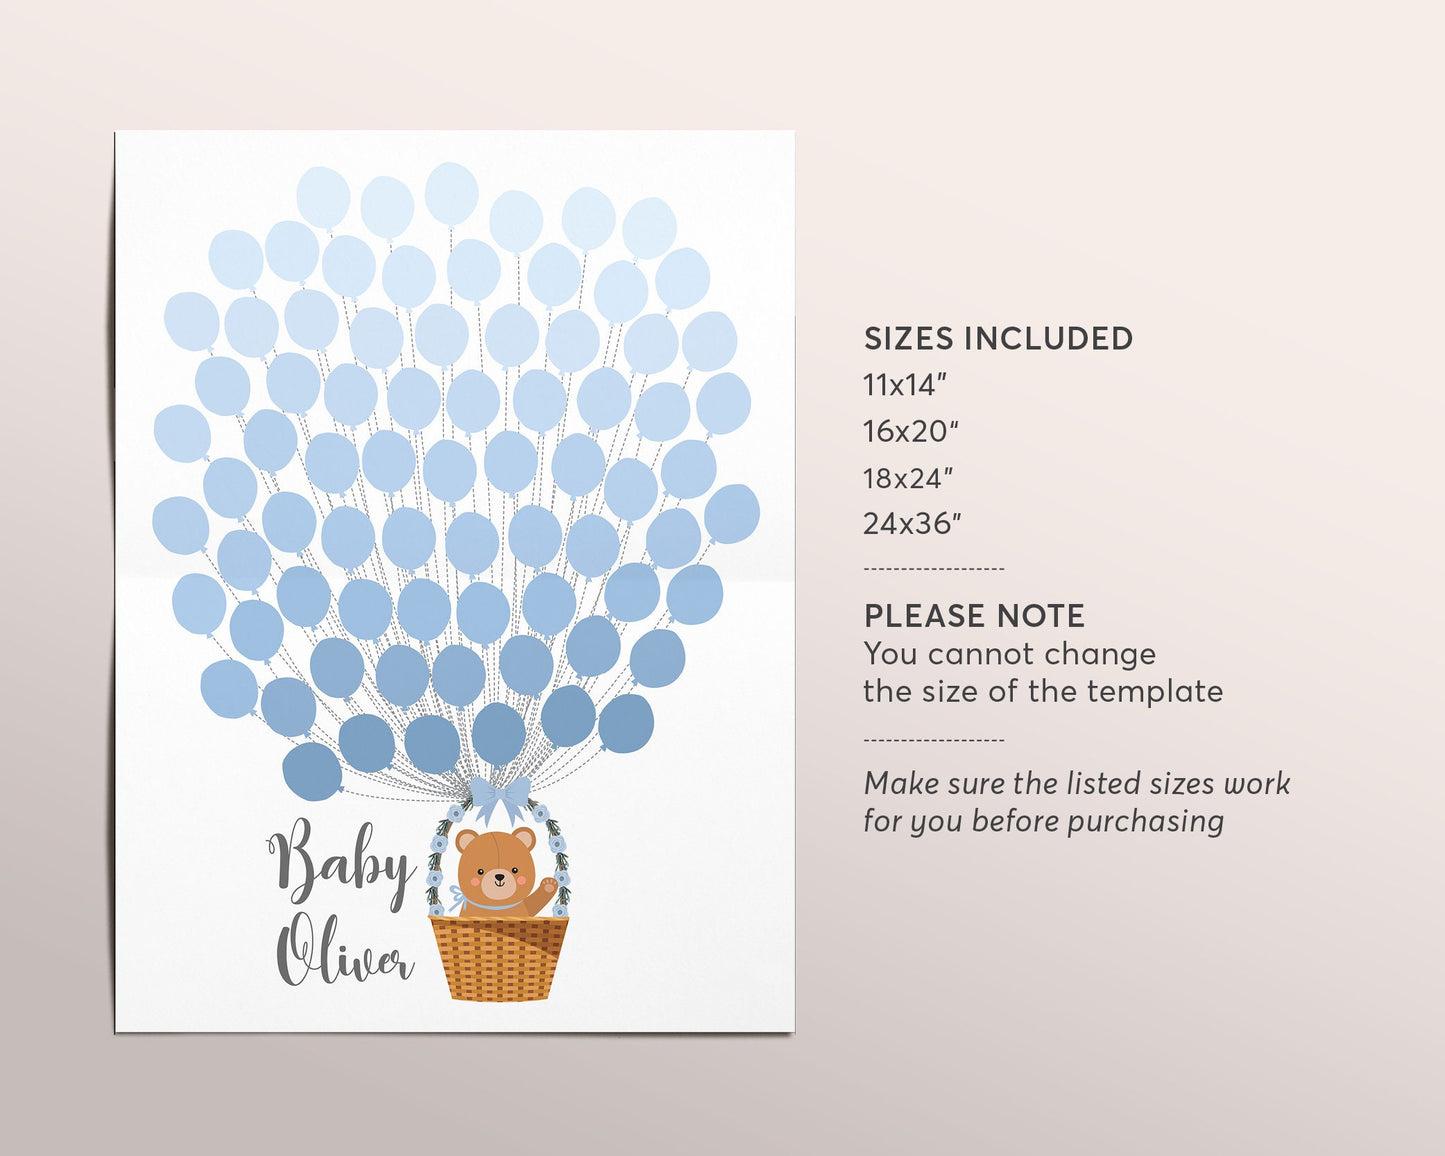 Teddy Bear BOY Baby Shower Guestbook Alternative Editable Template, Balloons Basket Signature Guest Book, First Communion, Sign-In Balloons